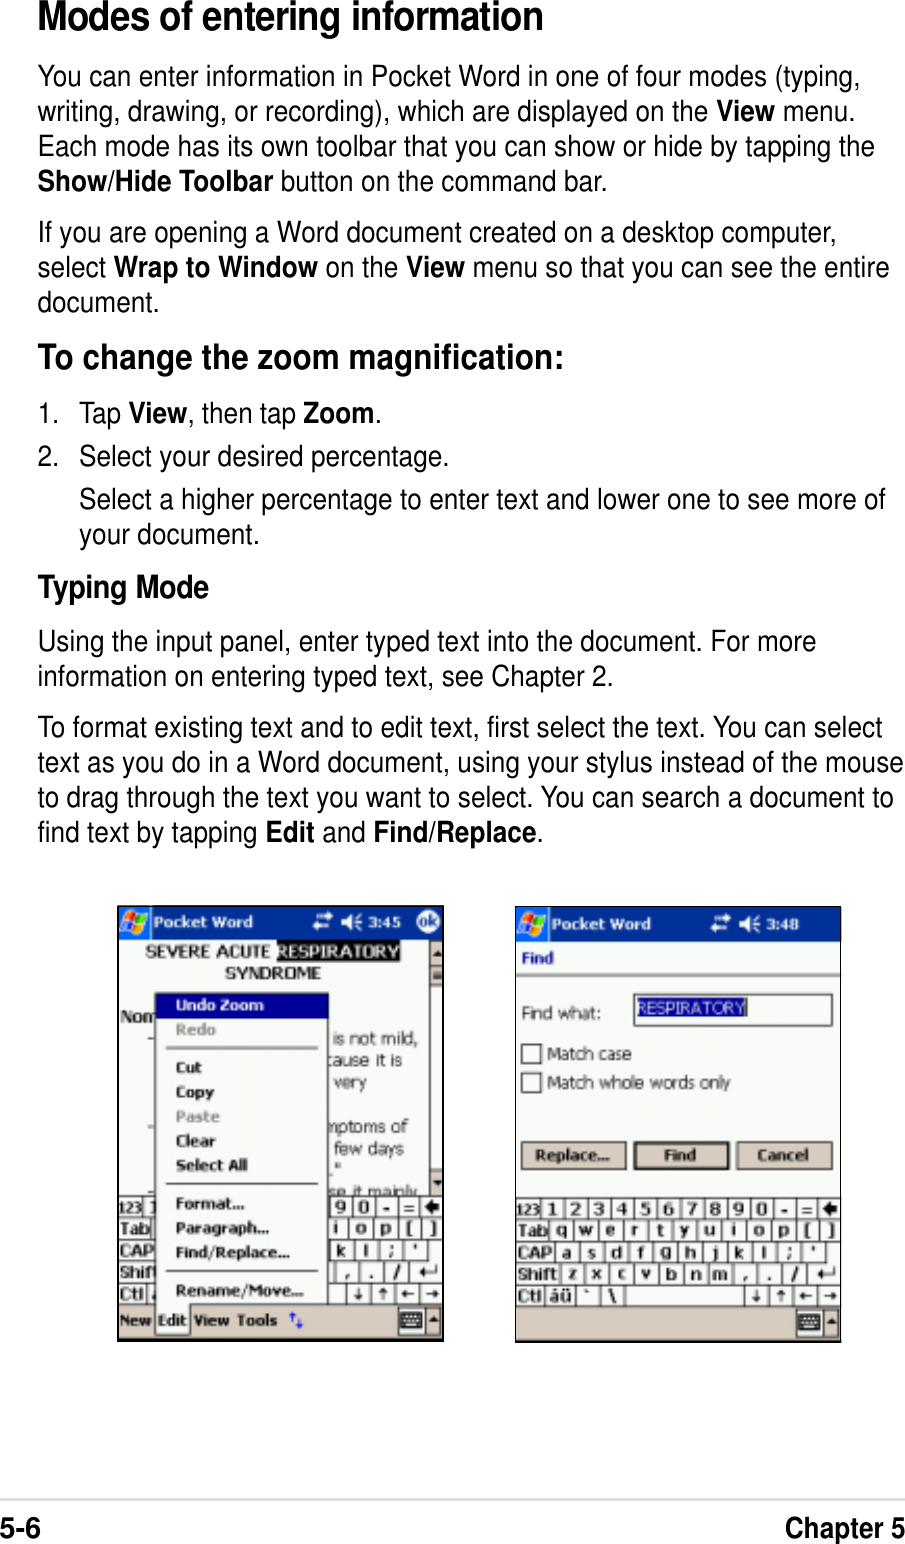 5-6Chapter 5Modes of entering informationYou can enter information in Pocket Word in one of four modes (typing,writing, drawing, or recording), which are displayed on the View menu.Each mode has its own toolbar that you can show or hide by tapping theShow/Hide Toolbar button on the command bar.If you are opening a Word document created on a desktop computer,select Wrap to Window on the View menu so that you can see the entiredocument.To change the zoom magnification:1. Tap View, then tap Zoom.2. Select your desired percentage.Select a higher percentage to enter text and lower one to see more ofyour document.Typing ModeUsing the input panel, enter typed text into the document. For moreinformation on entering typed text, see Chapter 2.To format existing text and to edit text, first select the text. You can selecttext as you do in a Word document, using your stylus instead of the mouseto drag through the text you want to select. You can search a document tofind text by tapping Edit and Find/Replace.